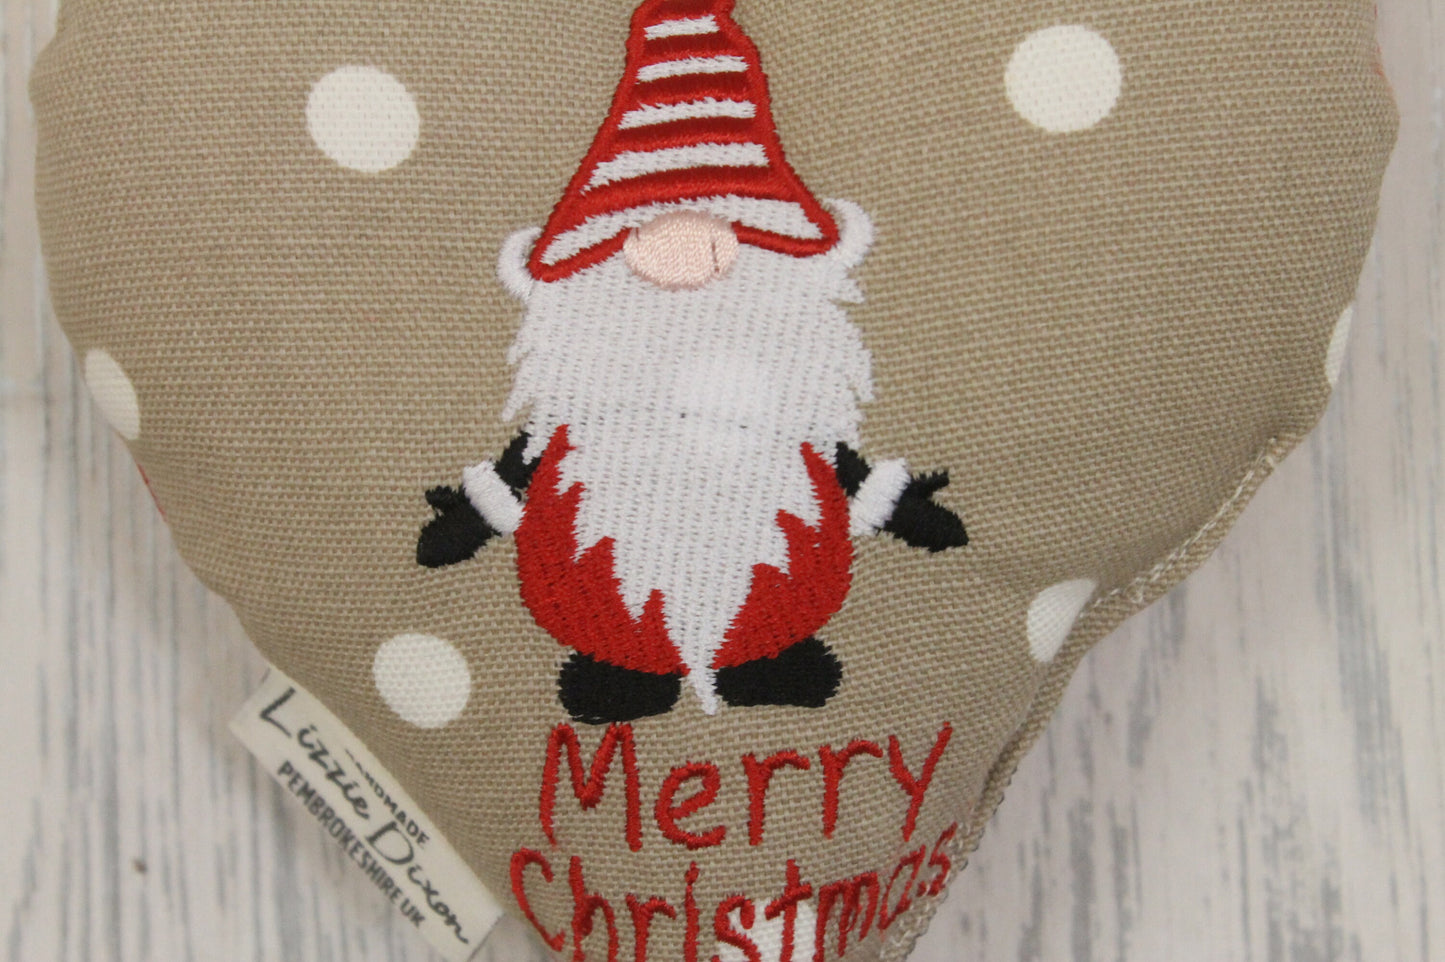 Taupe Star and Red Gnome Hanging Heart- Welsh Festive Gnome Nadolig Llawen -Merry Christmas decorative Hanging Ornament